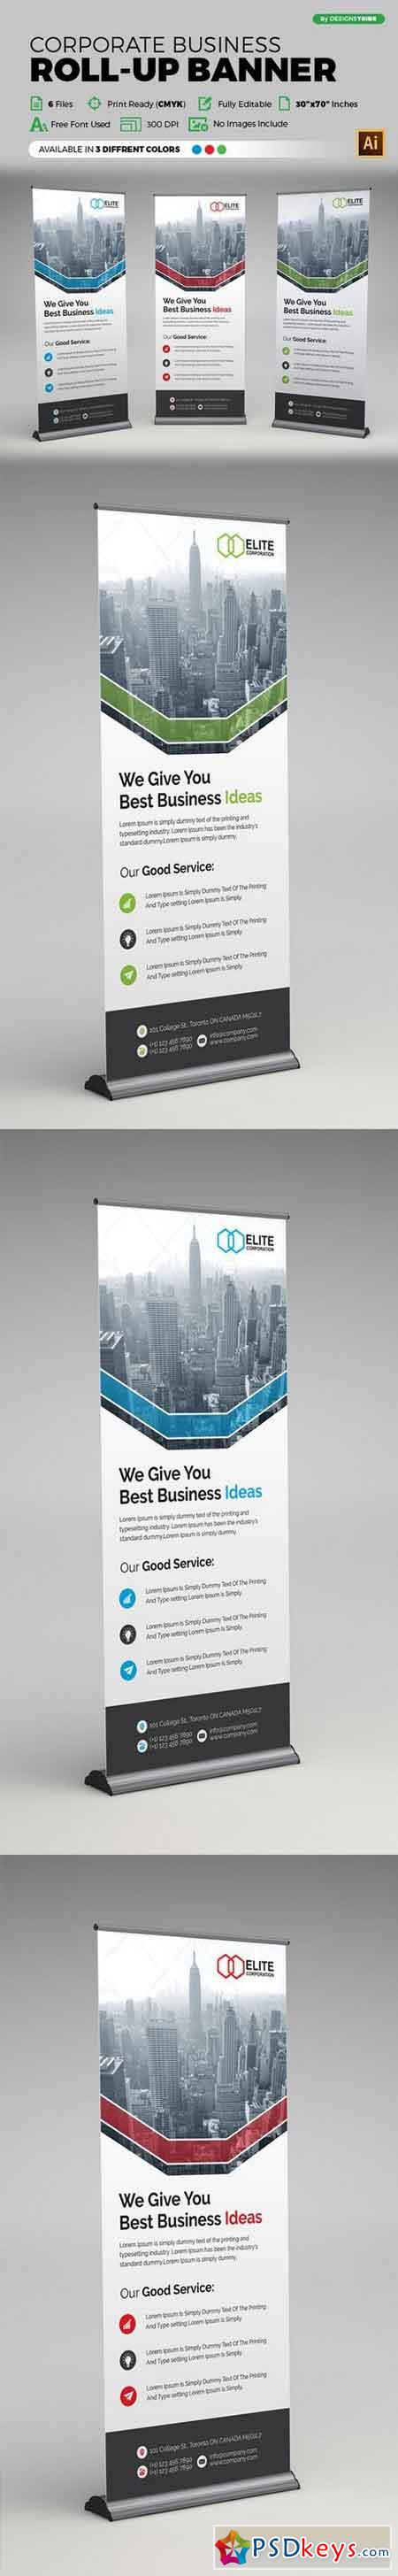 Corporate Roll up Banner 1440793